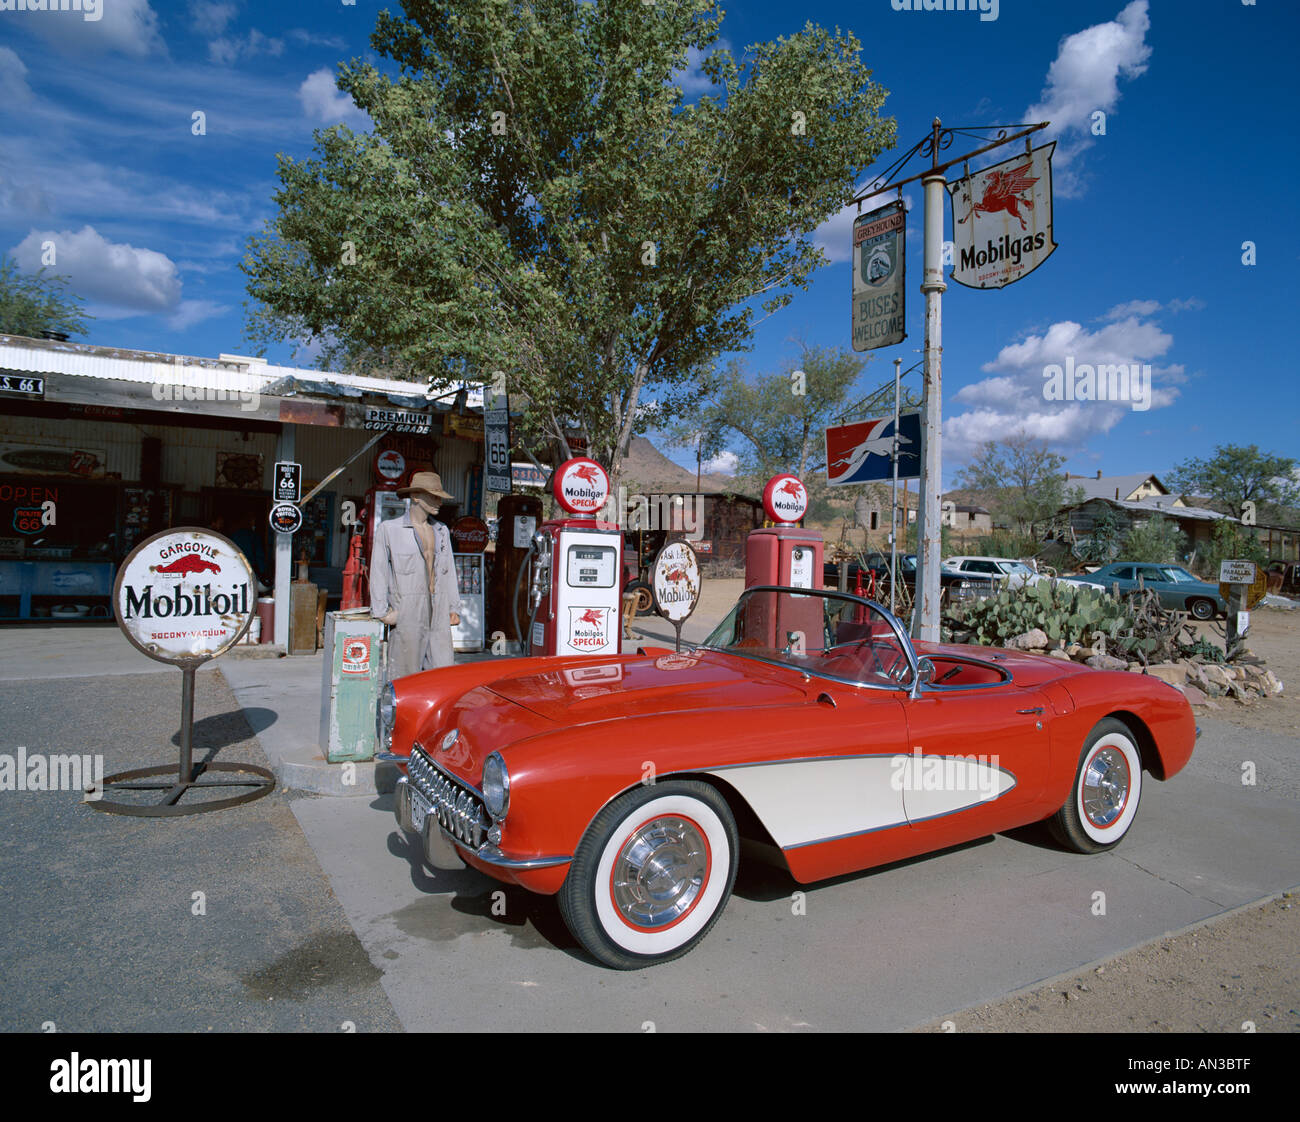 Route 66 / Gas Station with Red Chevrolet Corvette 1957 Car, Hackberry, Arizona, USA Stock Photo